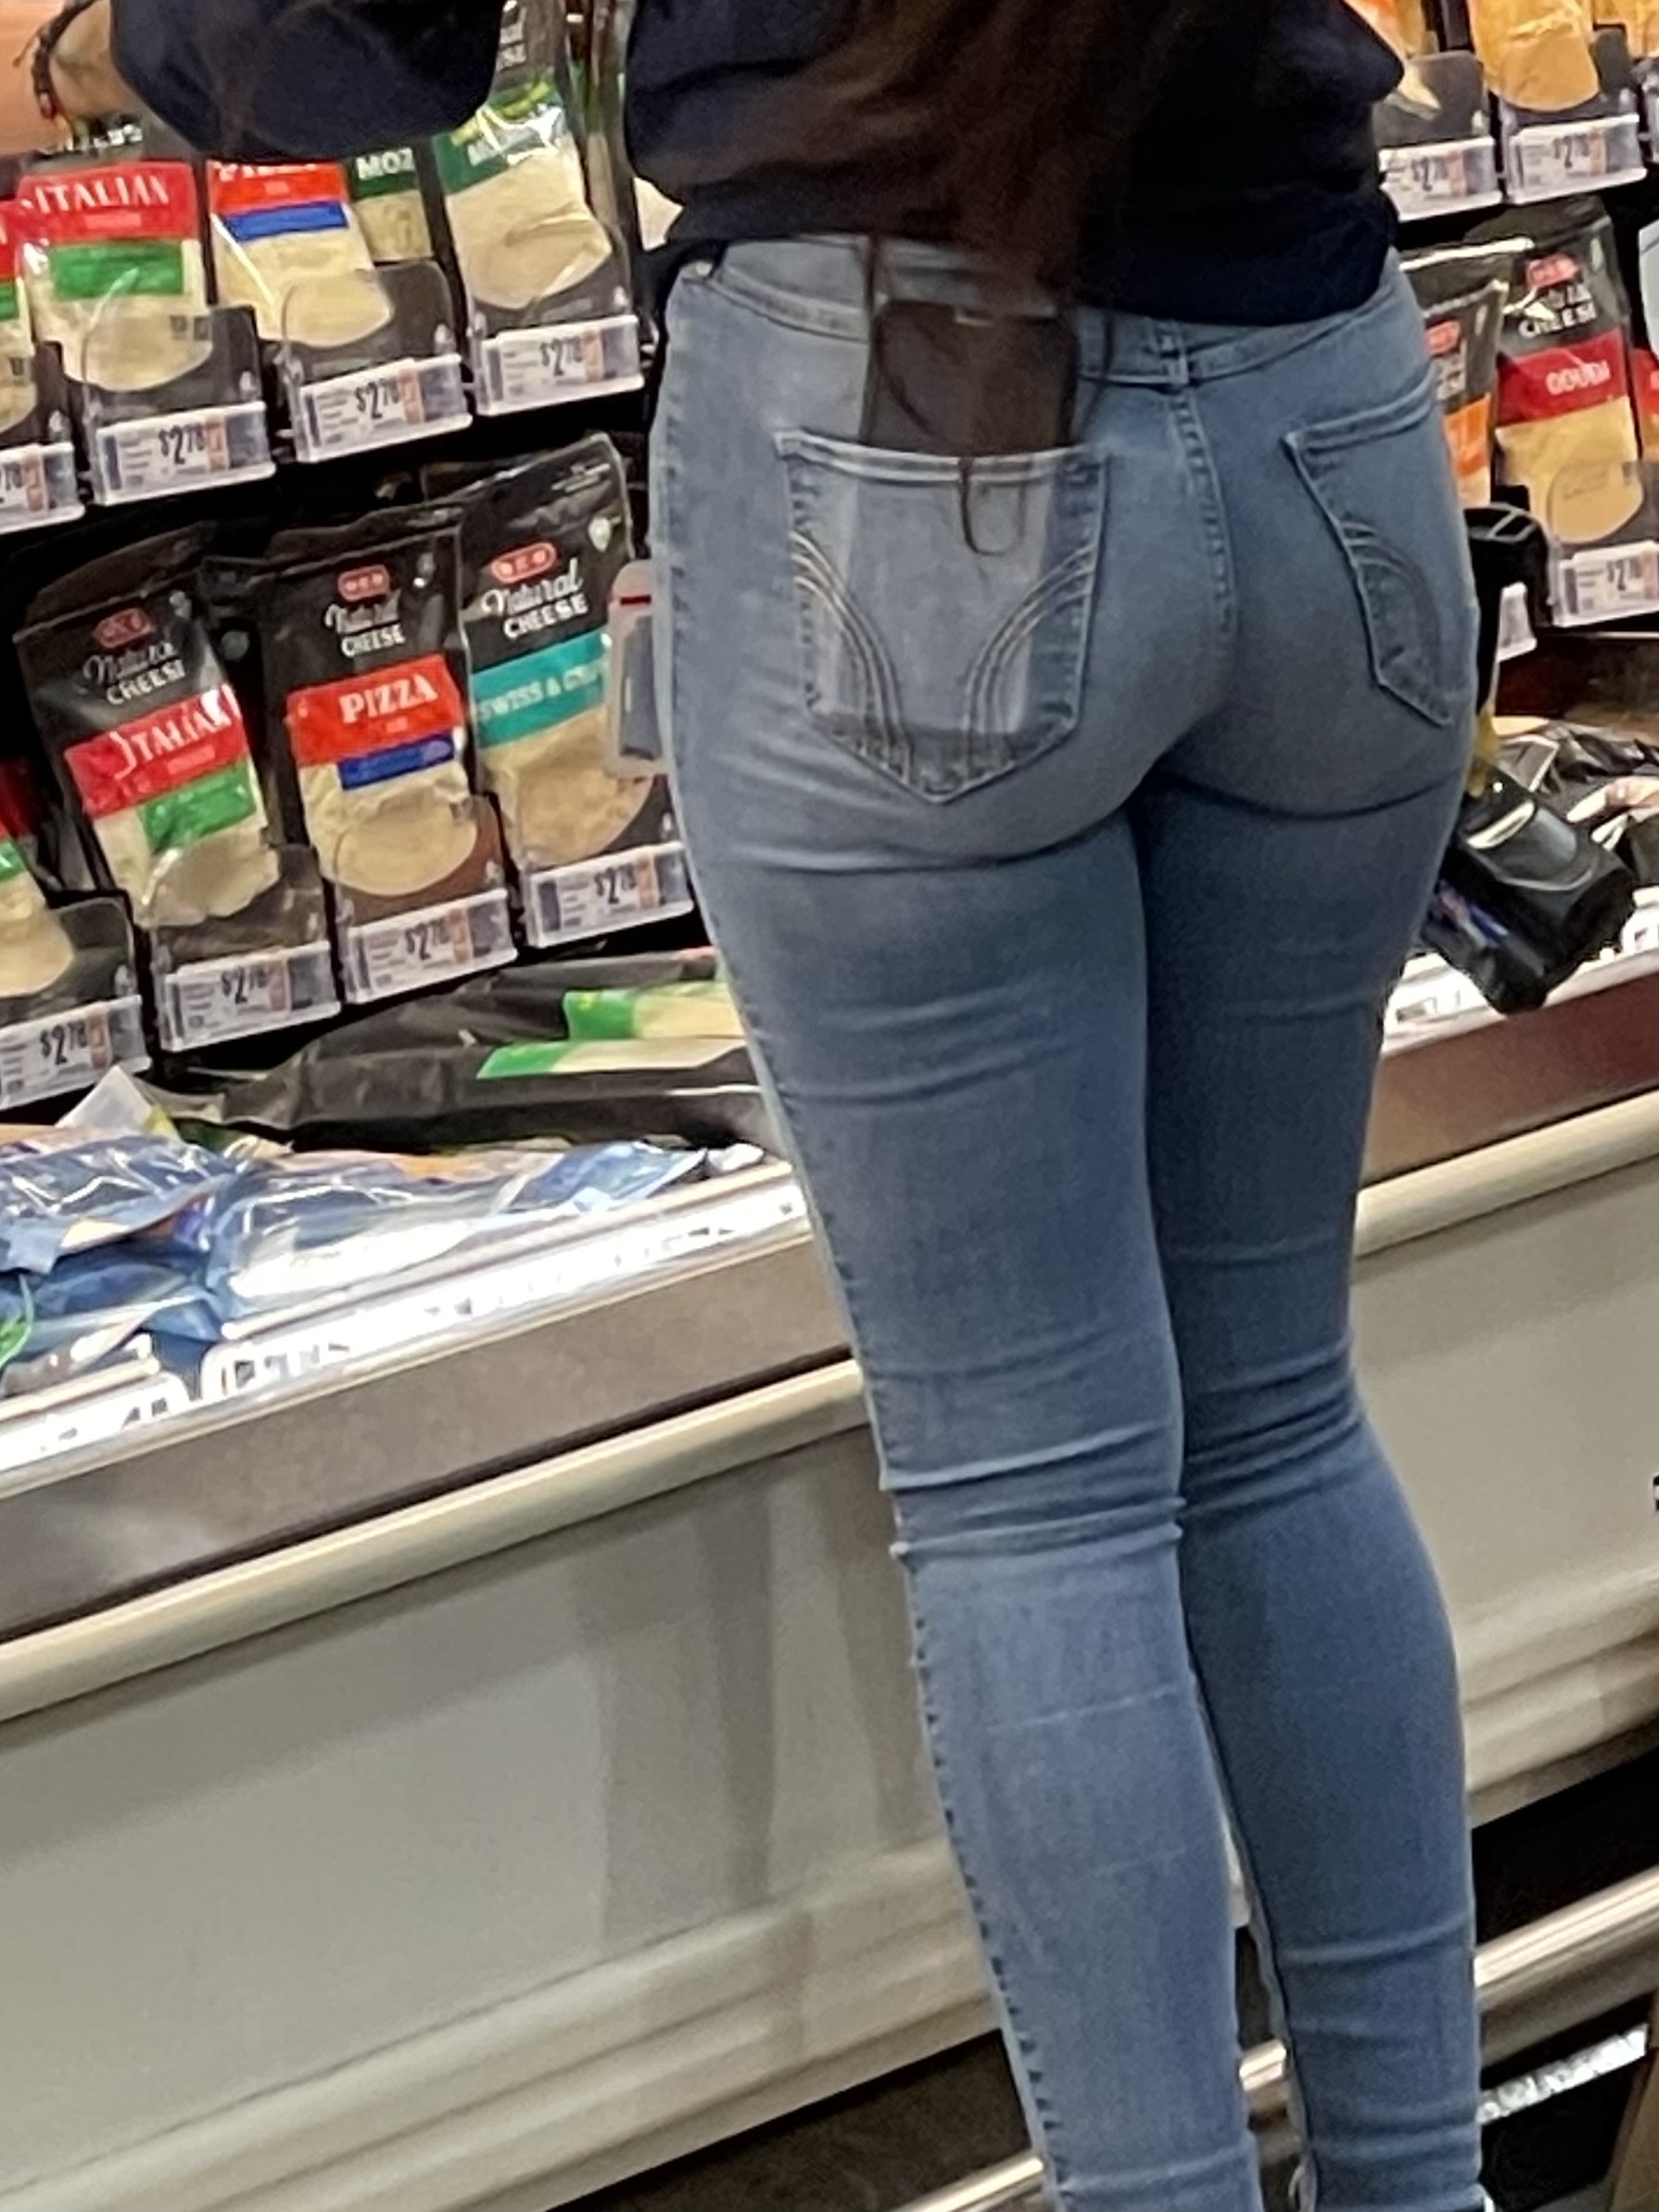 New haul of perfect ass coworker! (CLOSE UP) - Tight Jeans - Forum